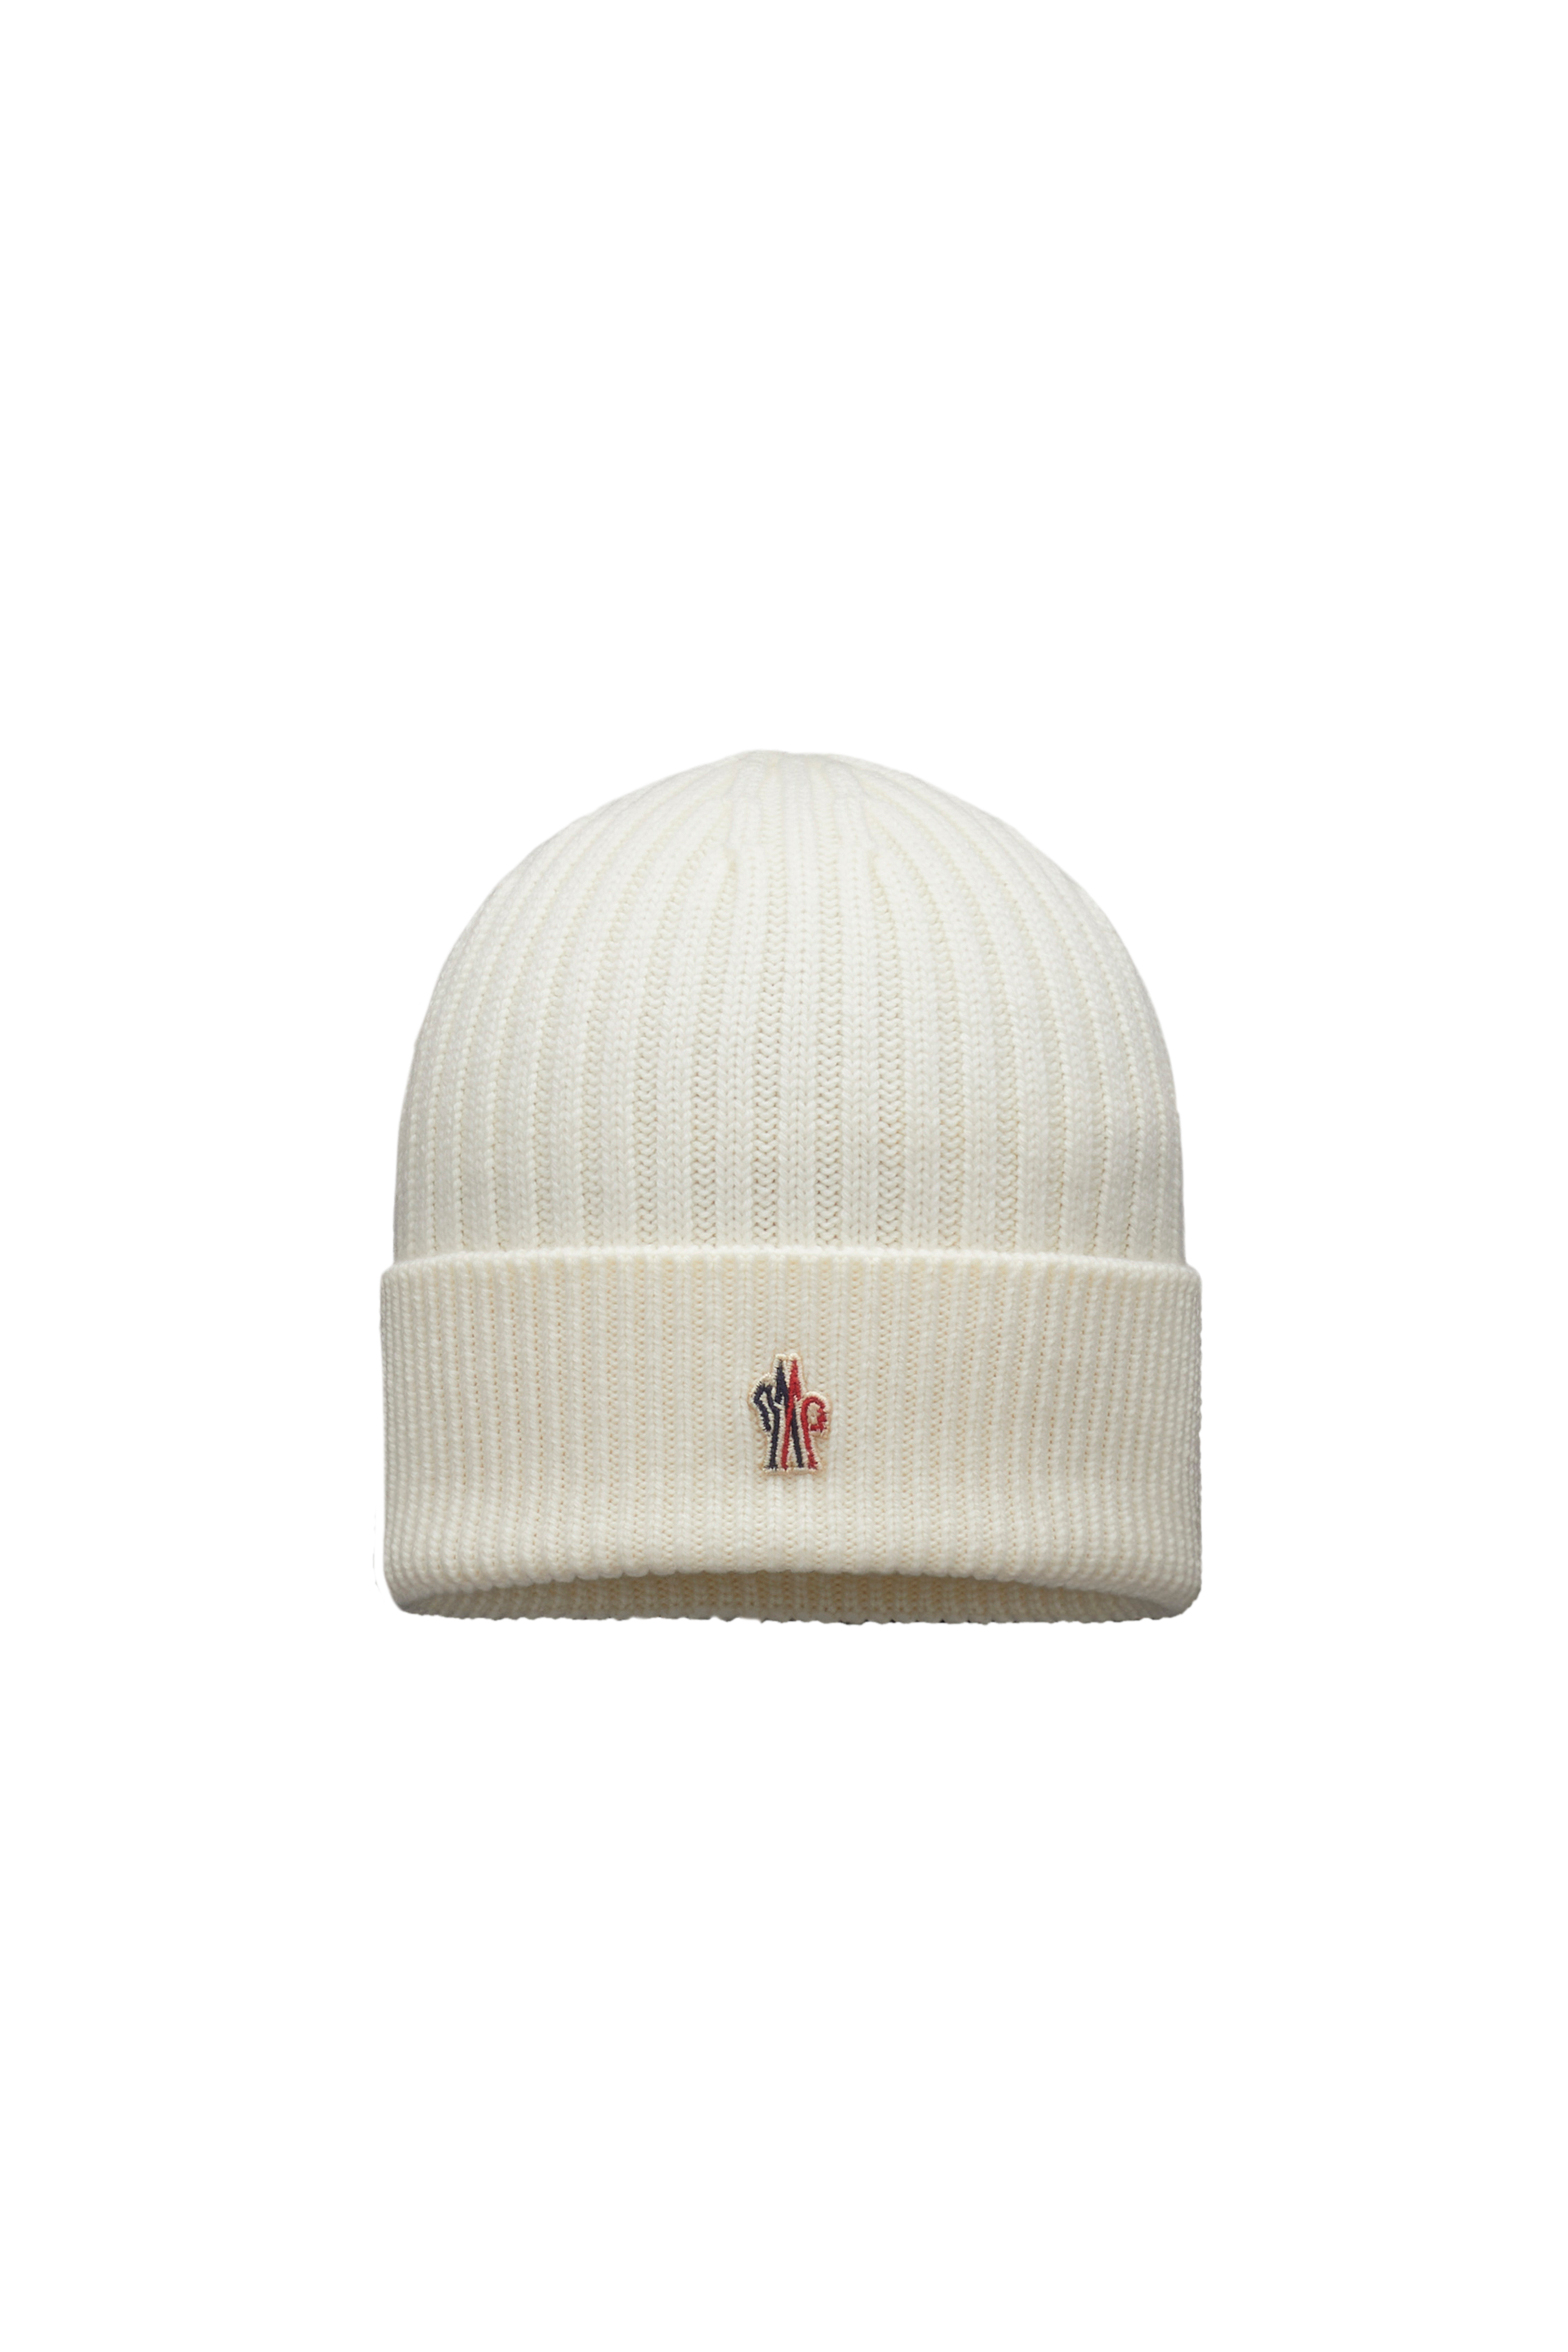 Moncler Ribbed Knit Wool Beanie White Size One Size